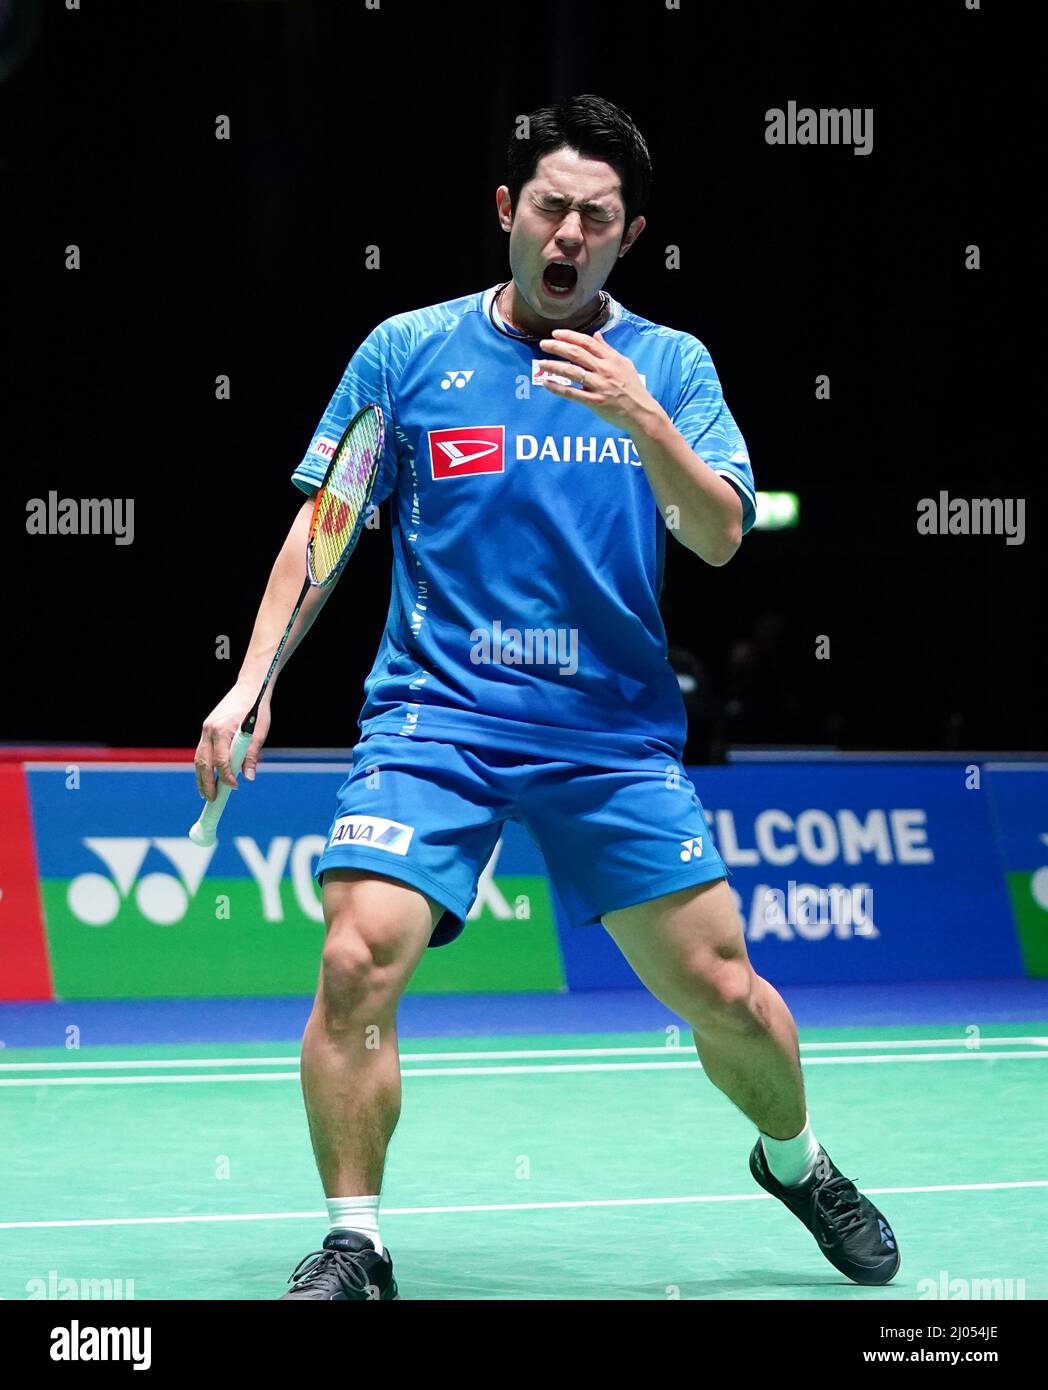 Japans Takuro Hoki and Yugo Kobayashi (not pictured) in action against Malaysias Man Wei Chong and Kai Wun Tee during day one of the YONEX All England Open Badminton Championships at the